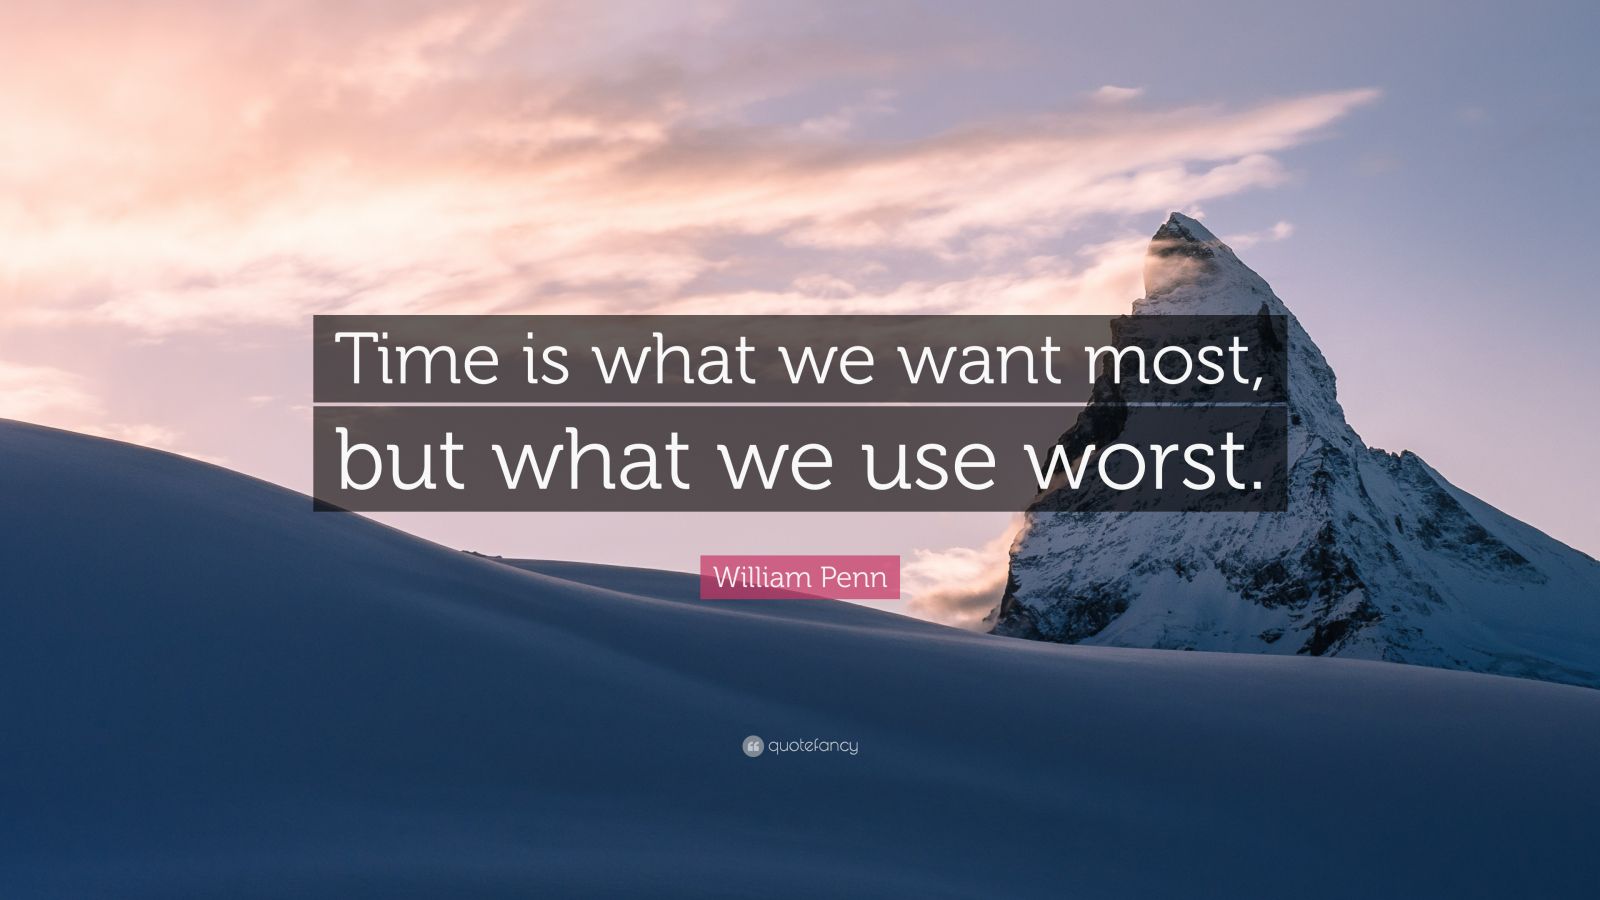 William Penn Quote: “Time is what we want most, but what we use worst ...